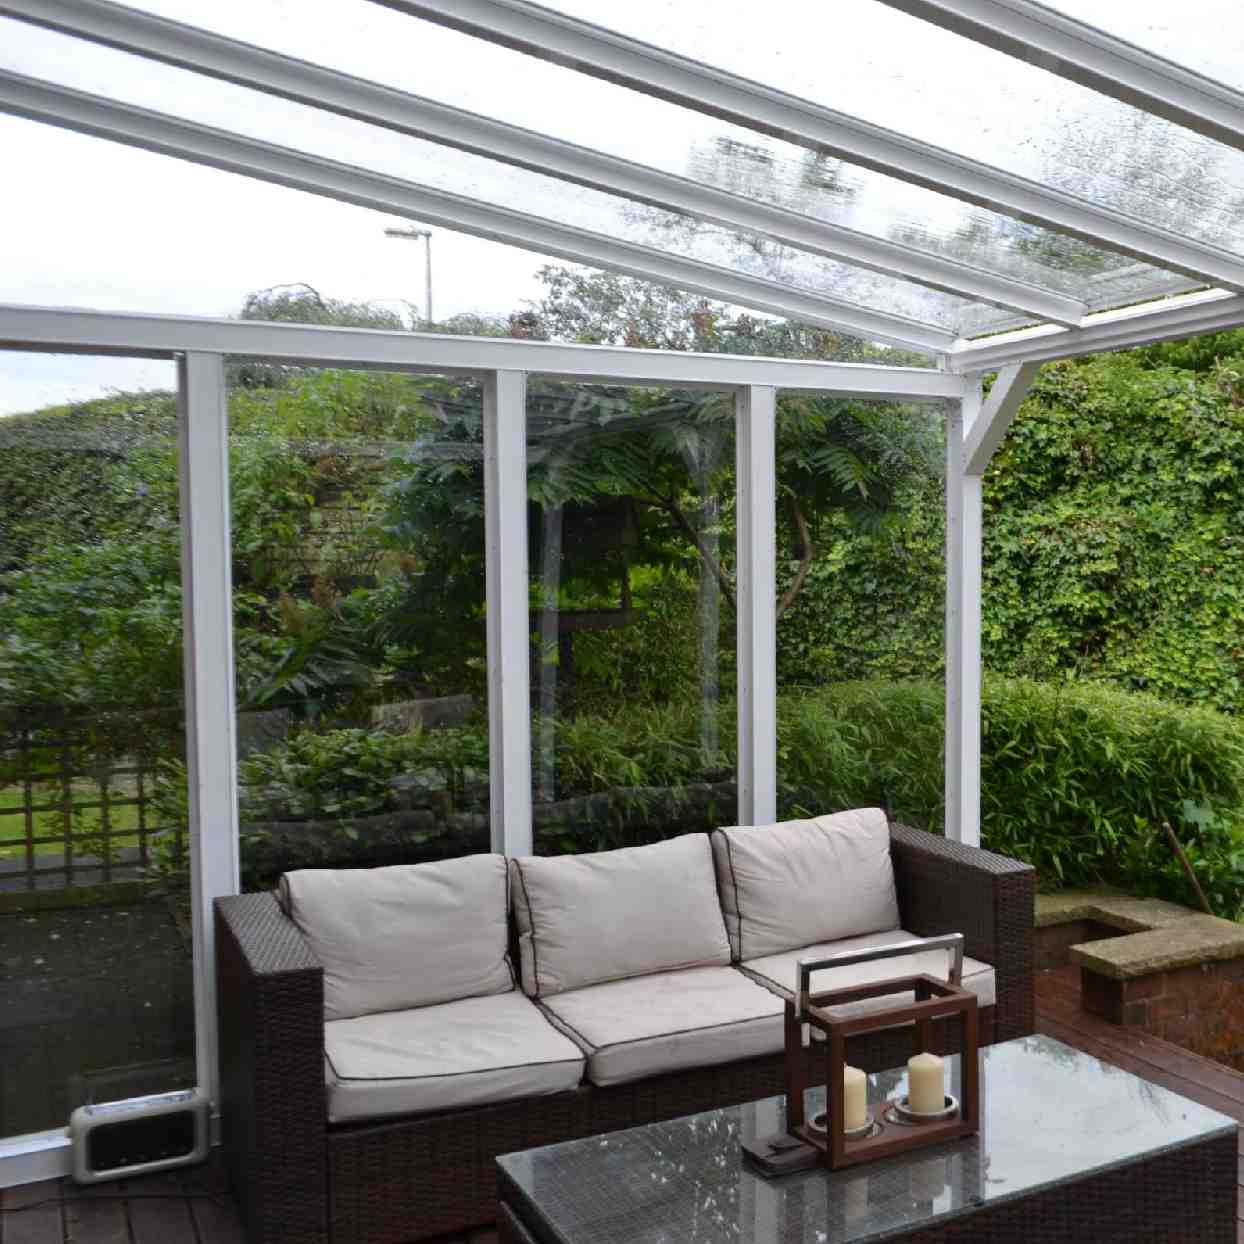 Buy Omega Verandah White with 6mm Glass Clear Plate Polycarbonate Glazing - 3.5m (W) x 1.5m (P), (3) Supporting Posts online today